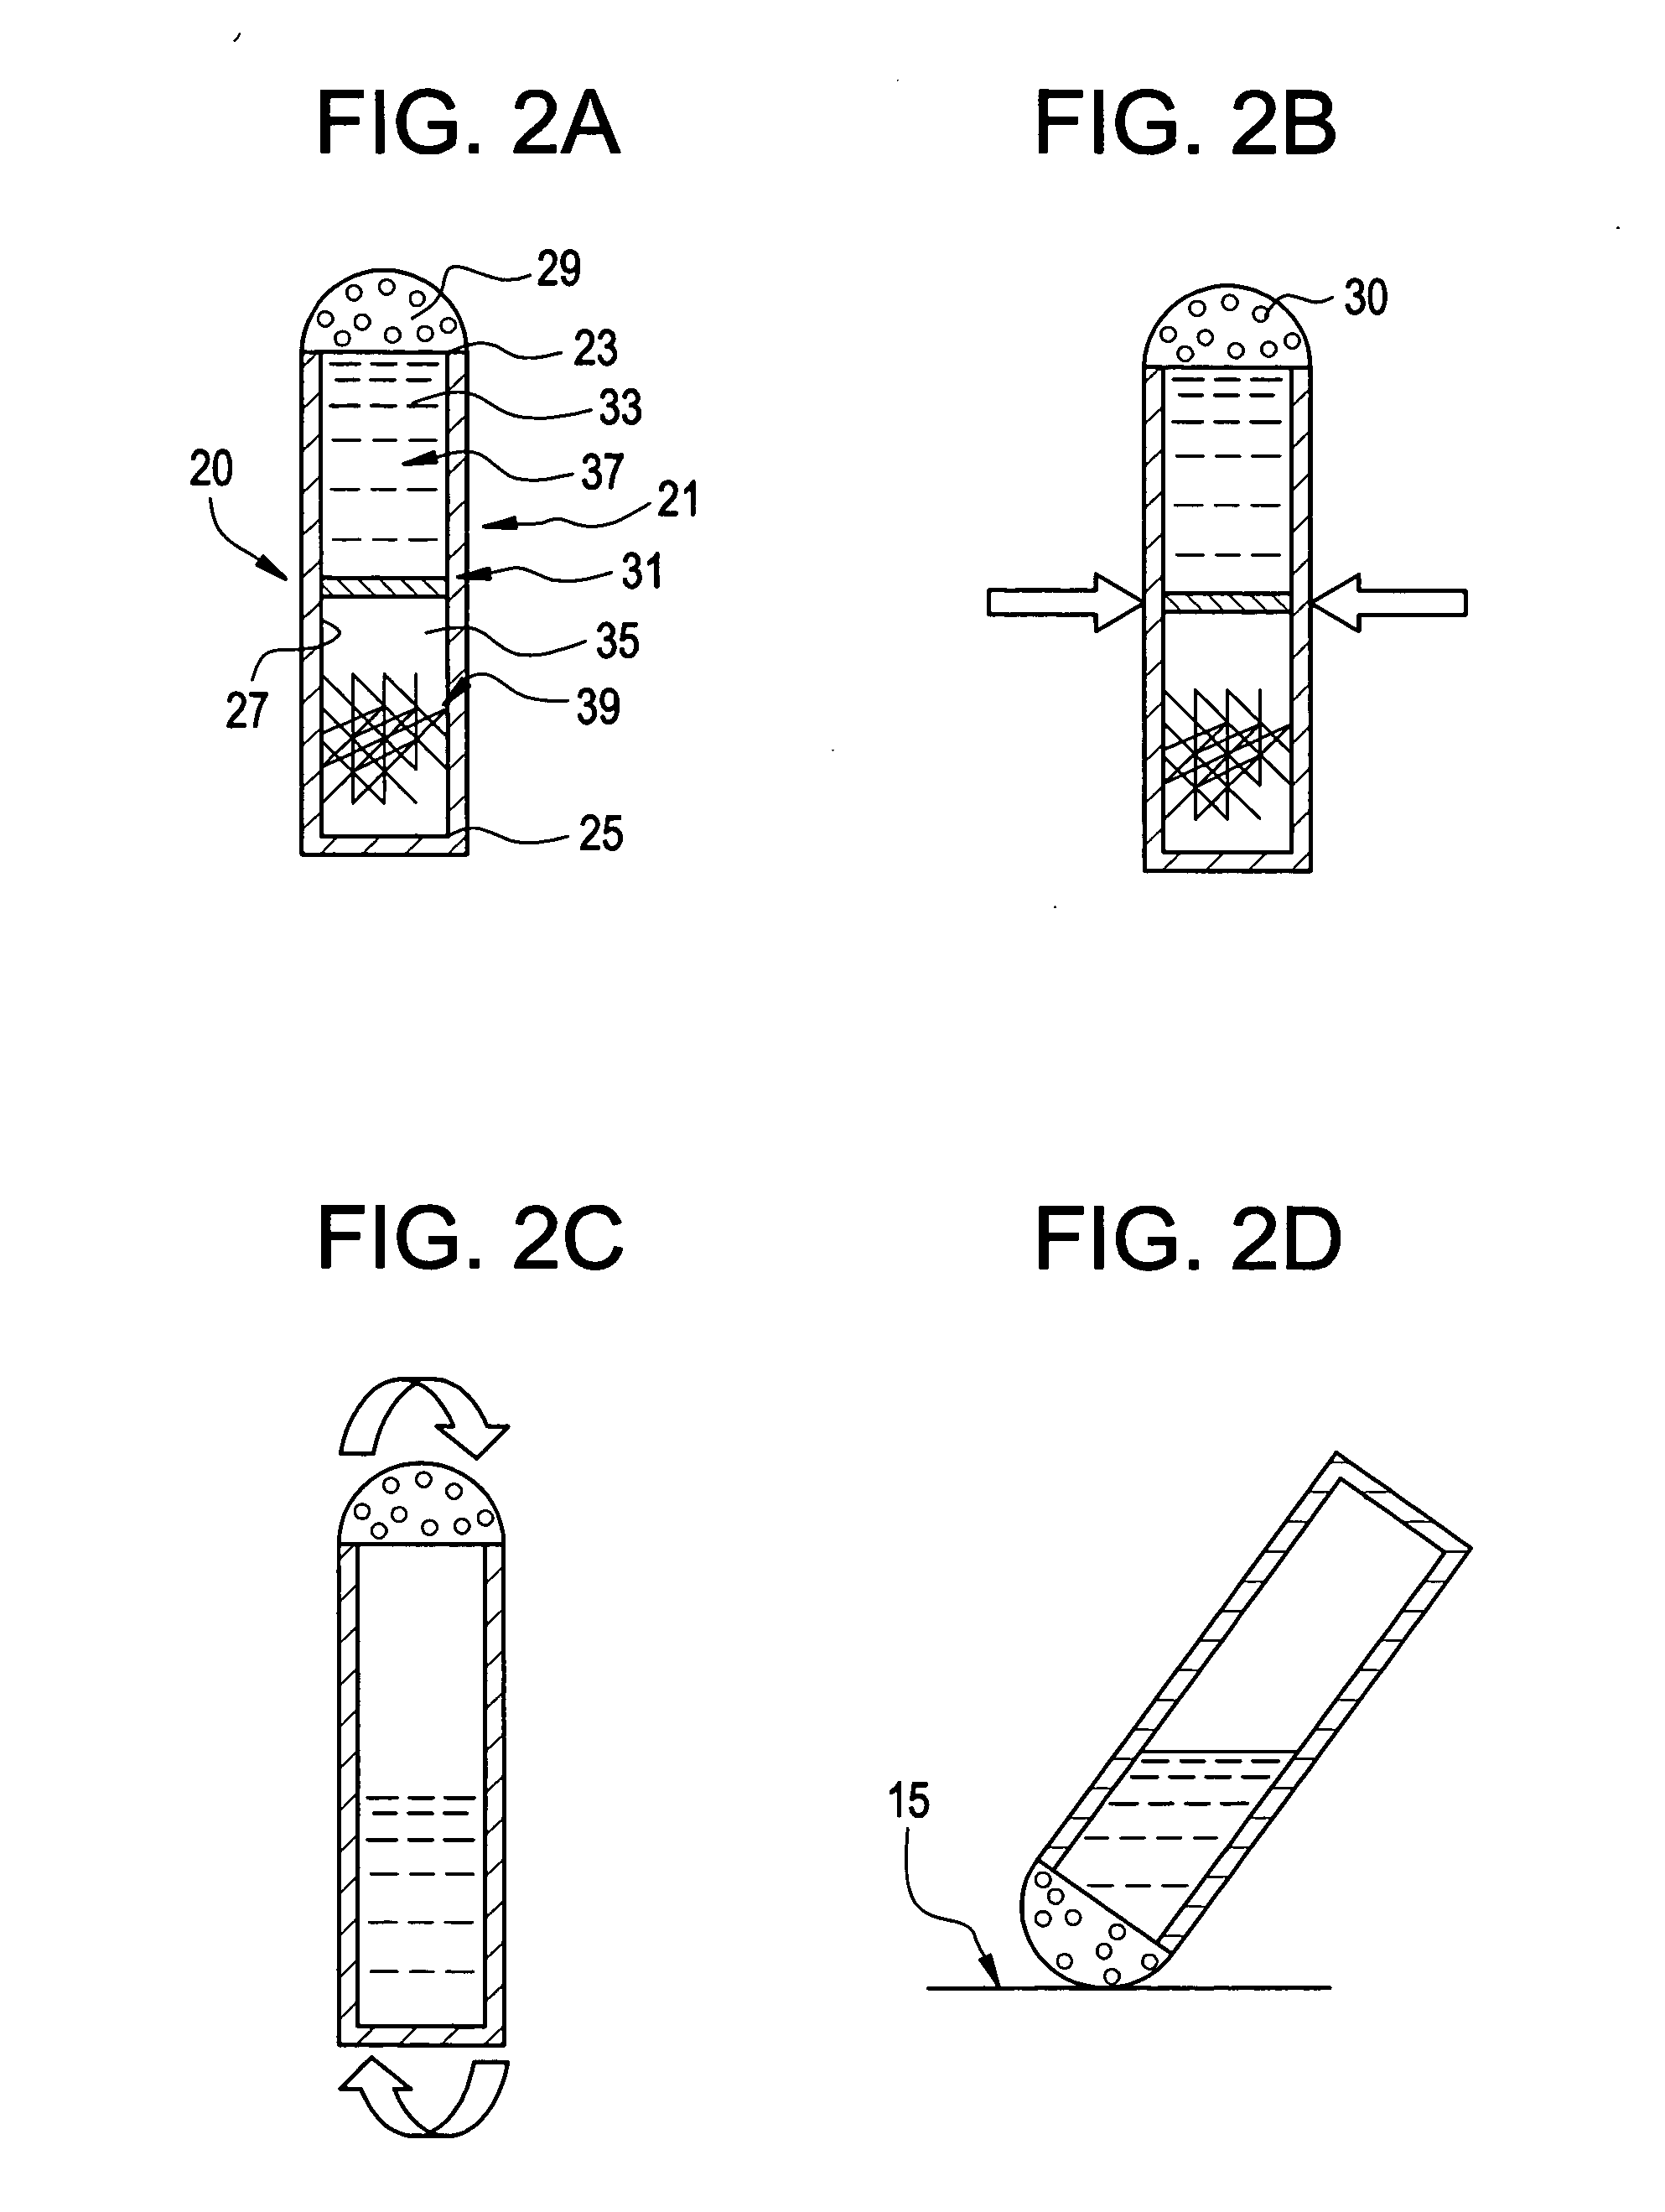 Method of intra-operative coating therapeutic agents onto sutures composite sutures and methods of use